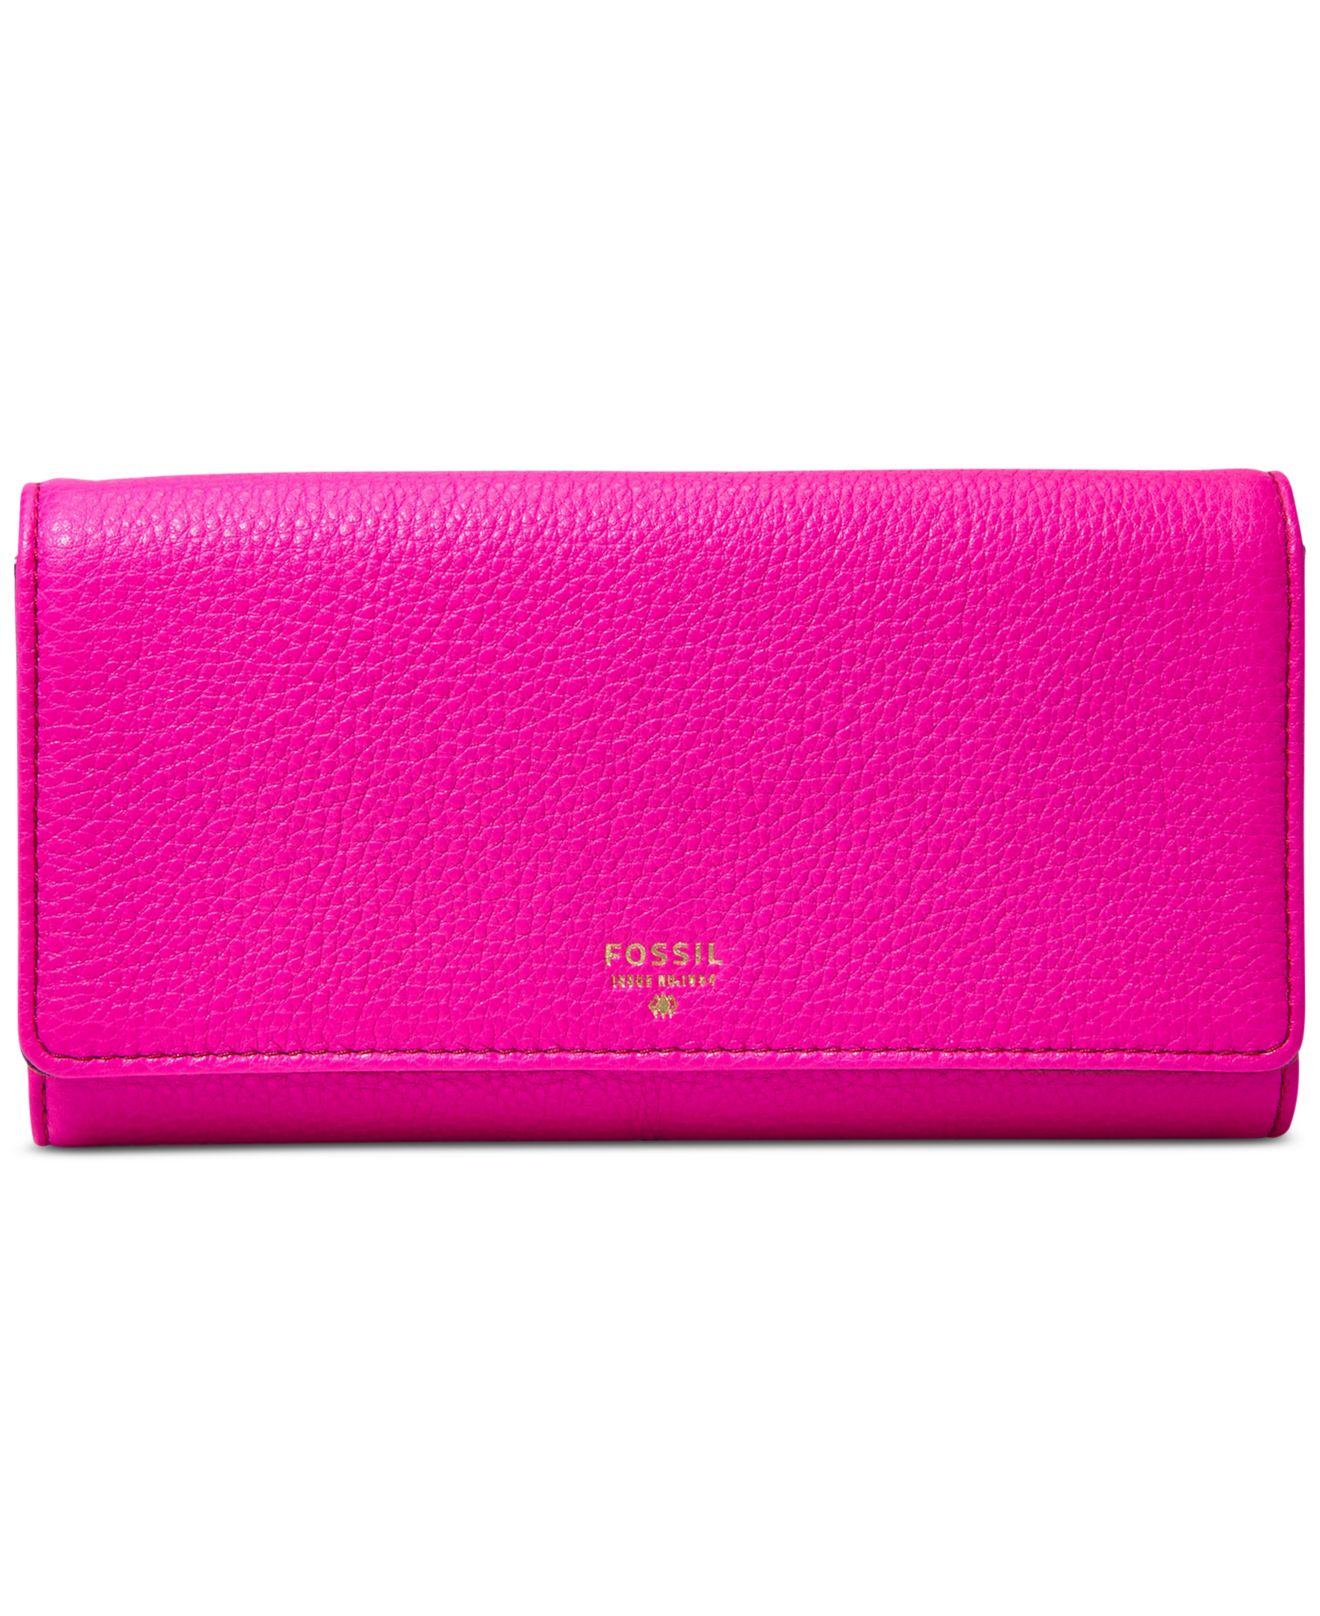 Fossil Sydney Leather Flap Clutch Wallet in Hot Pink (Pink) - Lyst